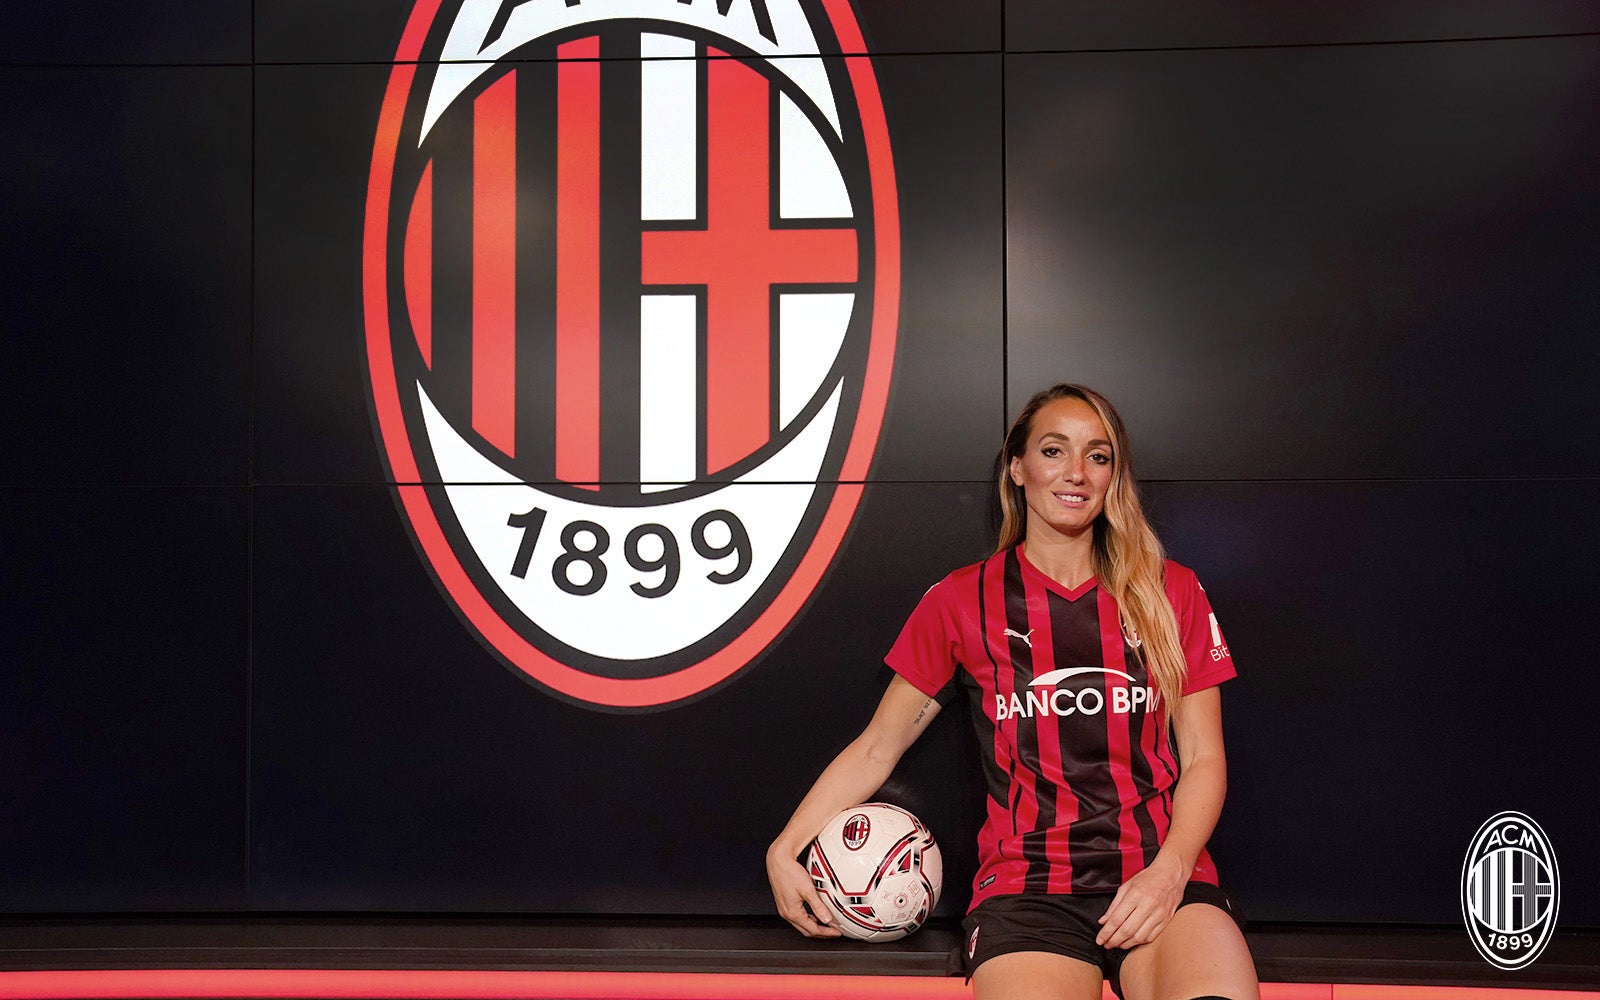 Kosovare Asllani of AC Milan in action during the Women Serie A match  News Photo - Getty Images